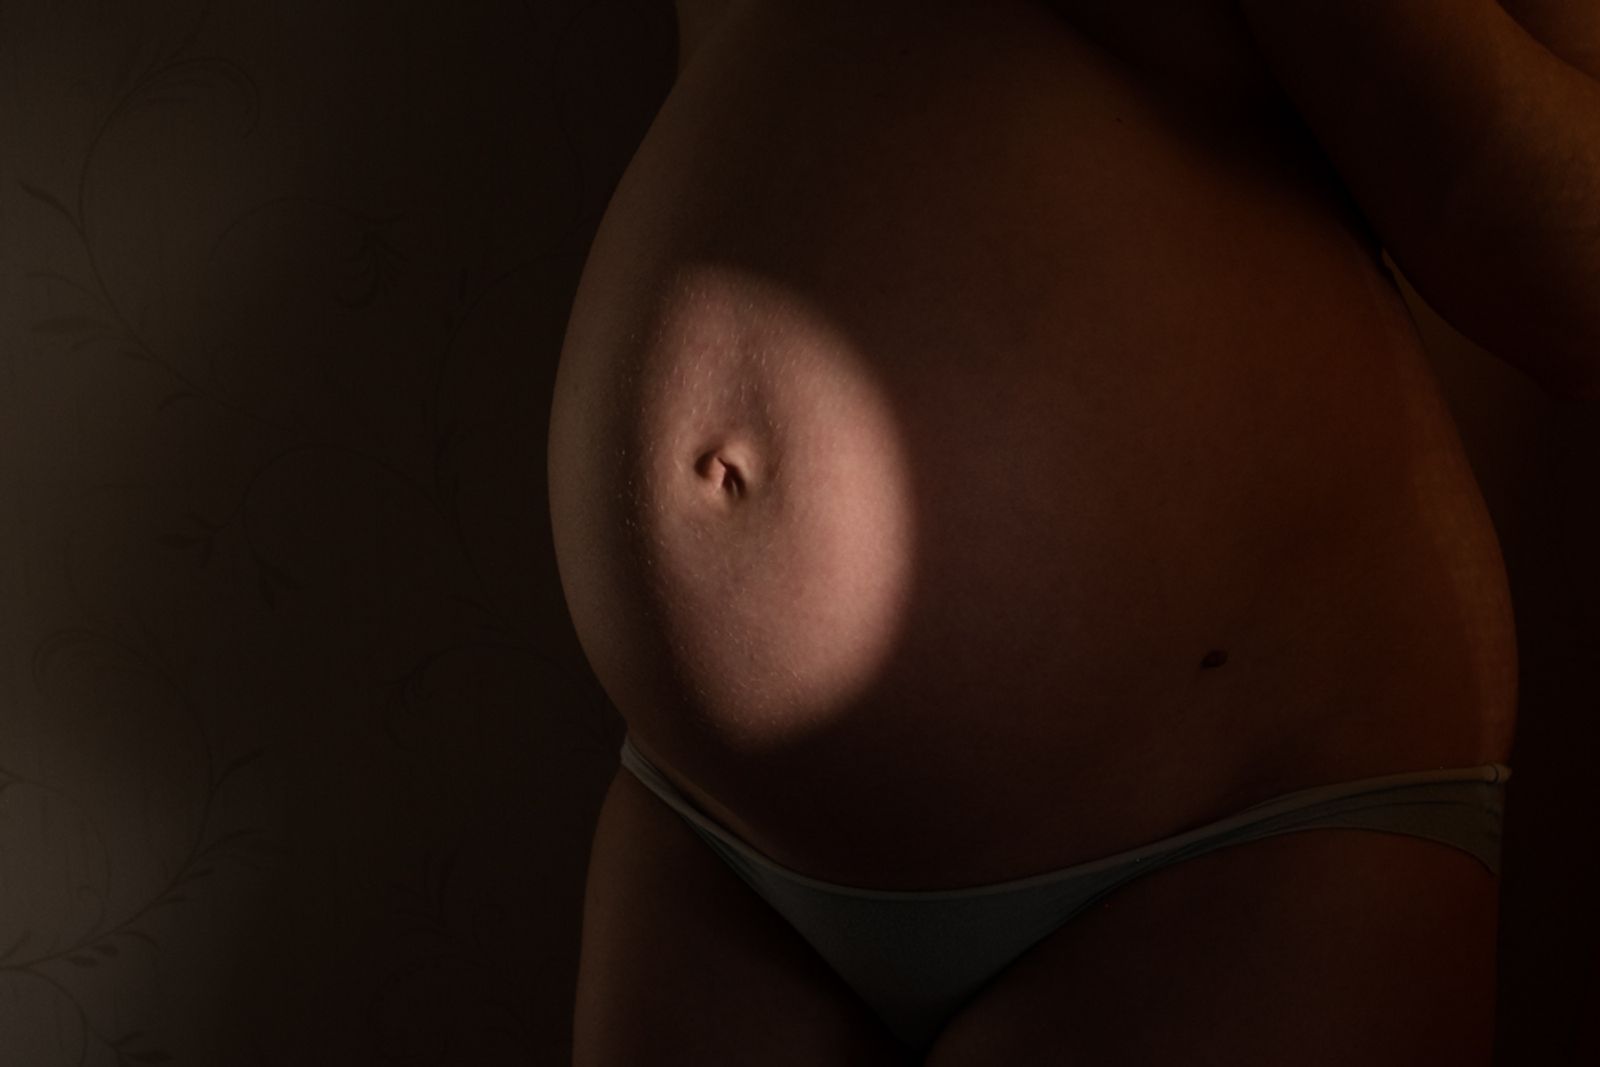 © Alyona Kochetkova - Image from the Right to give birth photography project